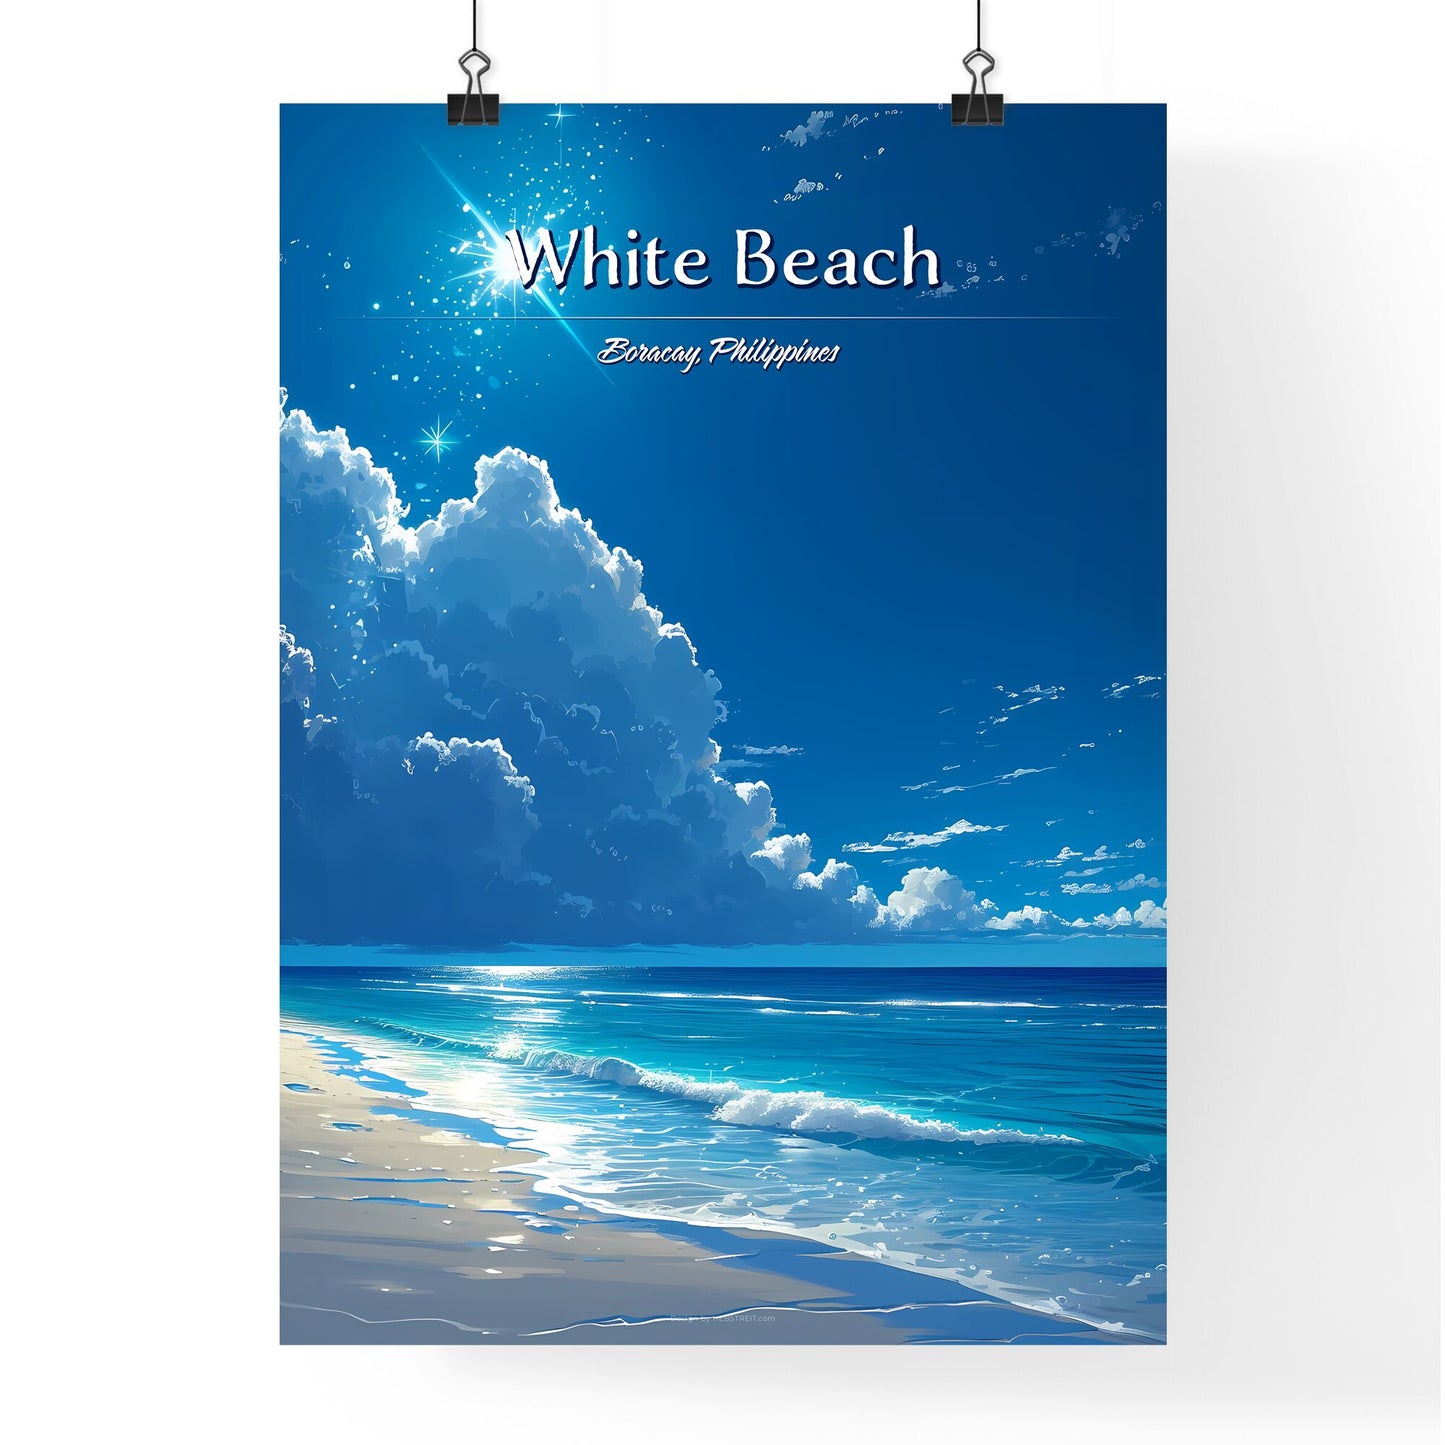 White Beach (Boracay), Philippines - Art print of a beach with a sandy beach and blue water and clouds Default Title